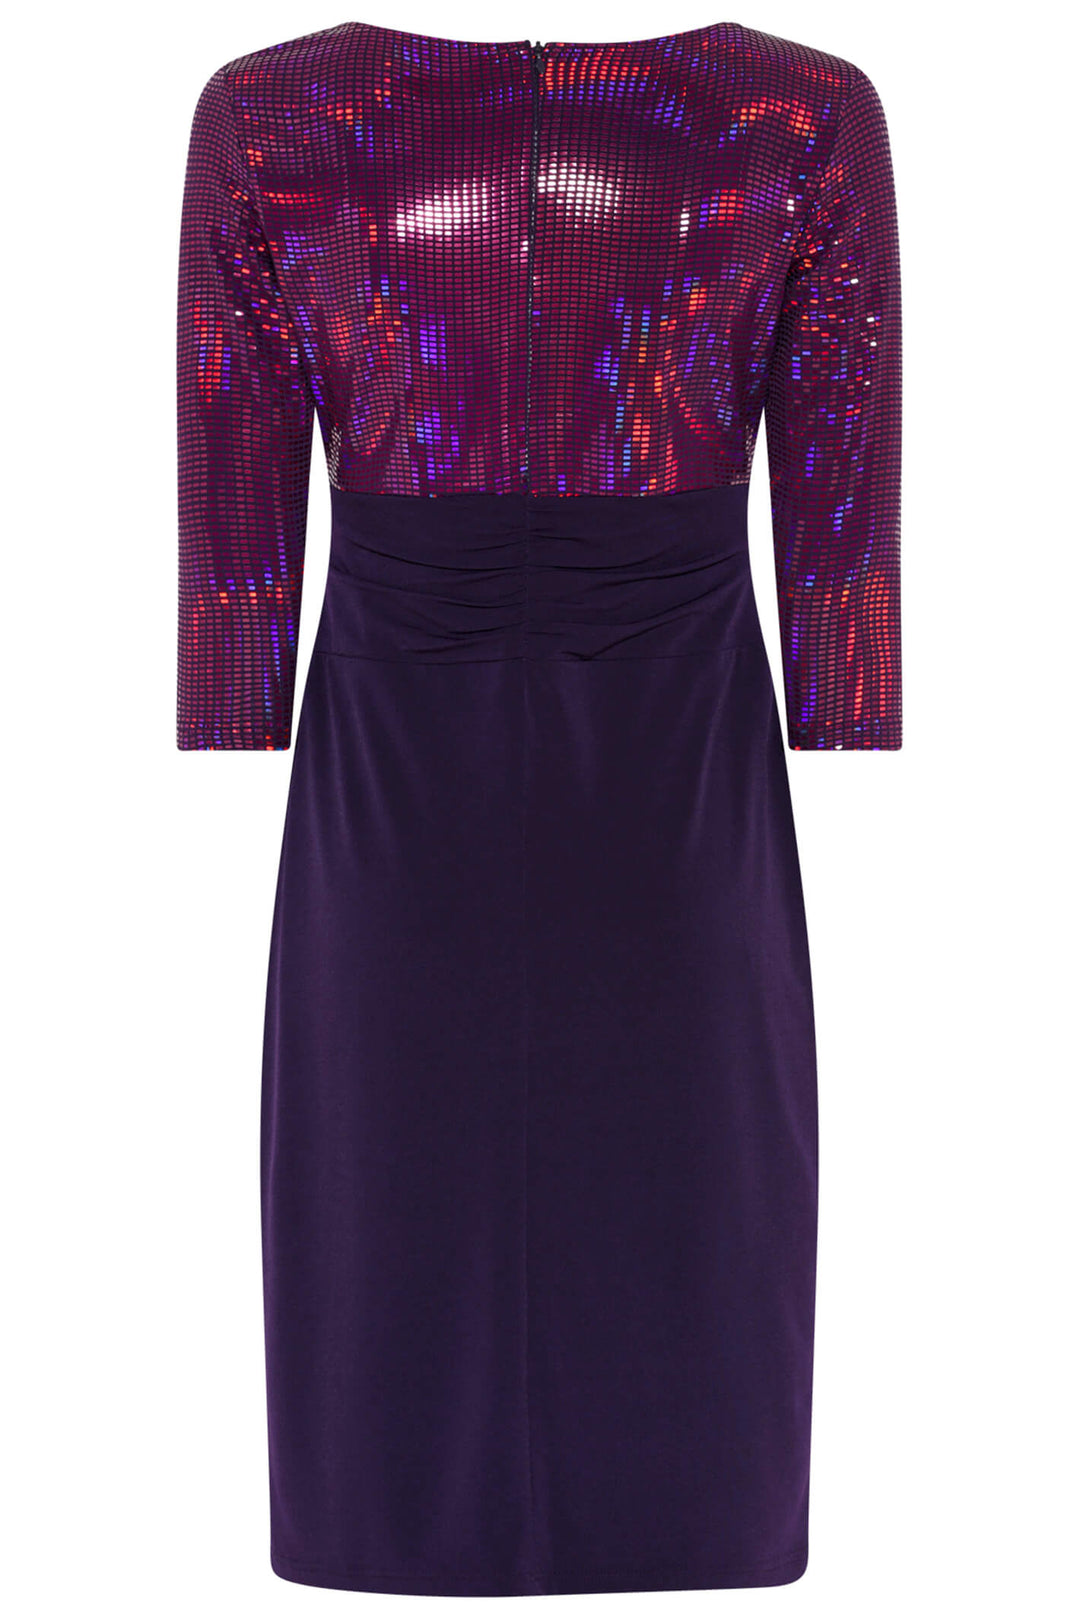 Tia 78738 58 Purple Shimmer Top Cocktail Party Dress - Experience Boutique